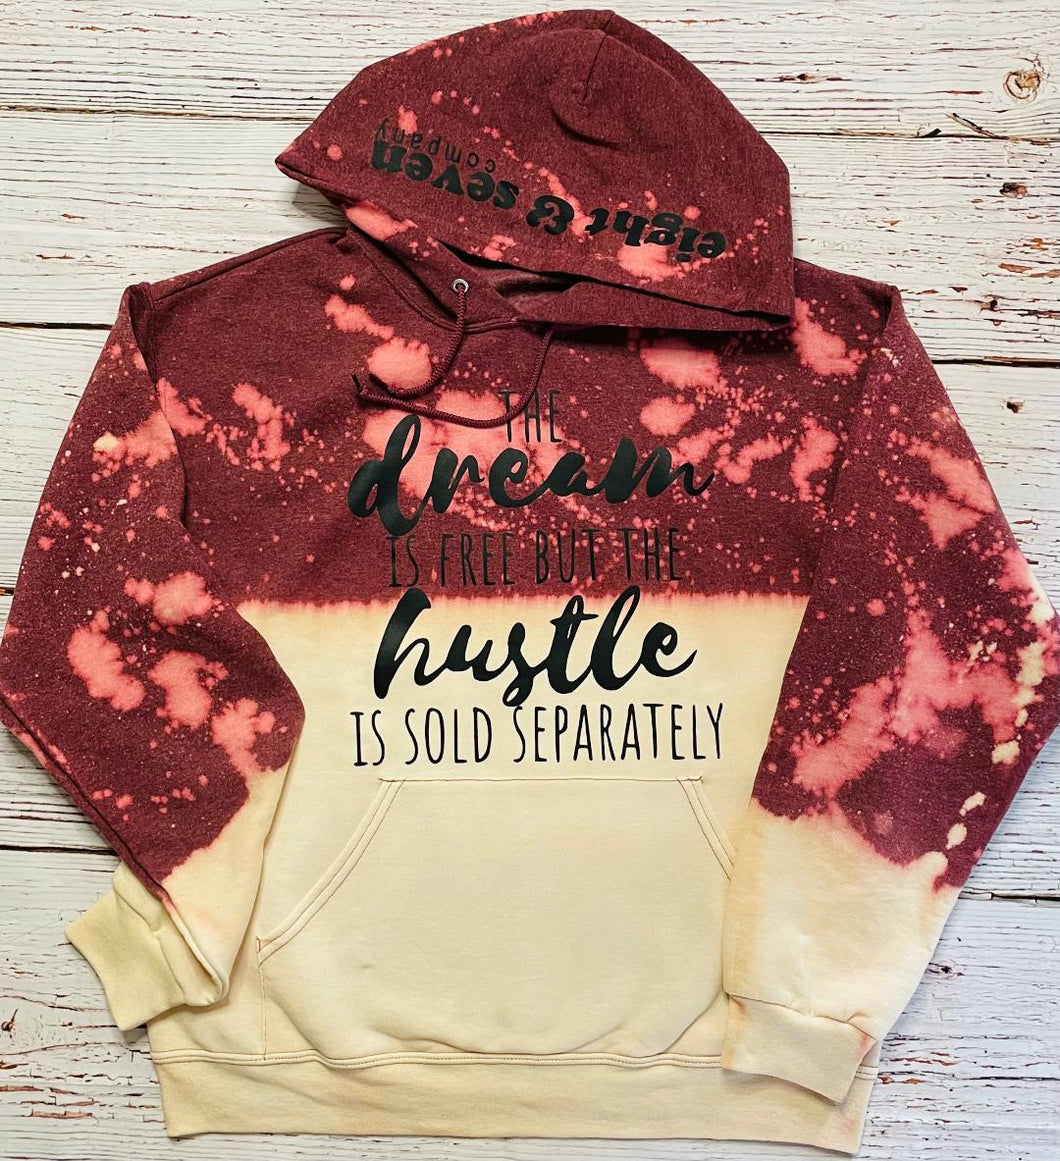 THE DREAM IS FREE BUT THE HUSTLE IS SOLD SEPARATELY SWEATER HOODIE